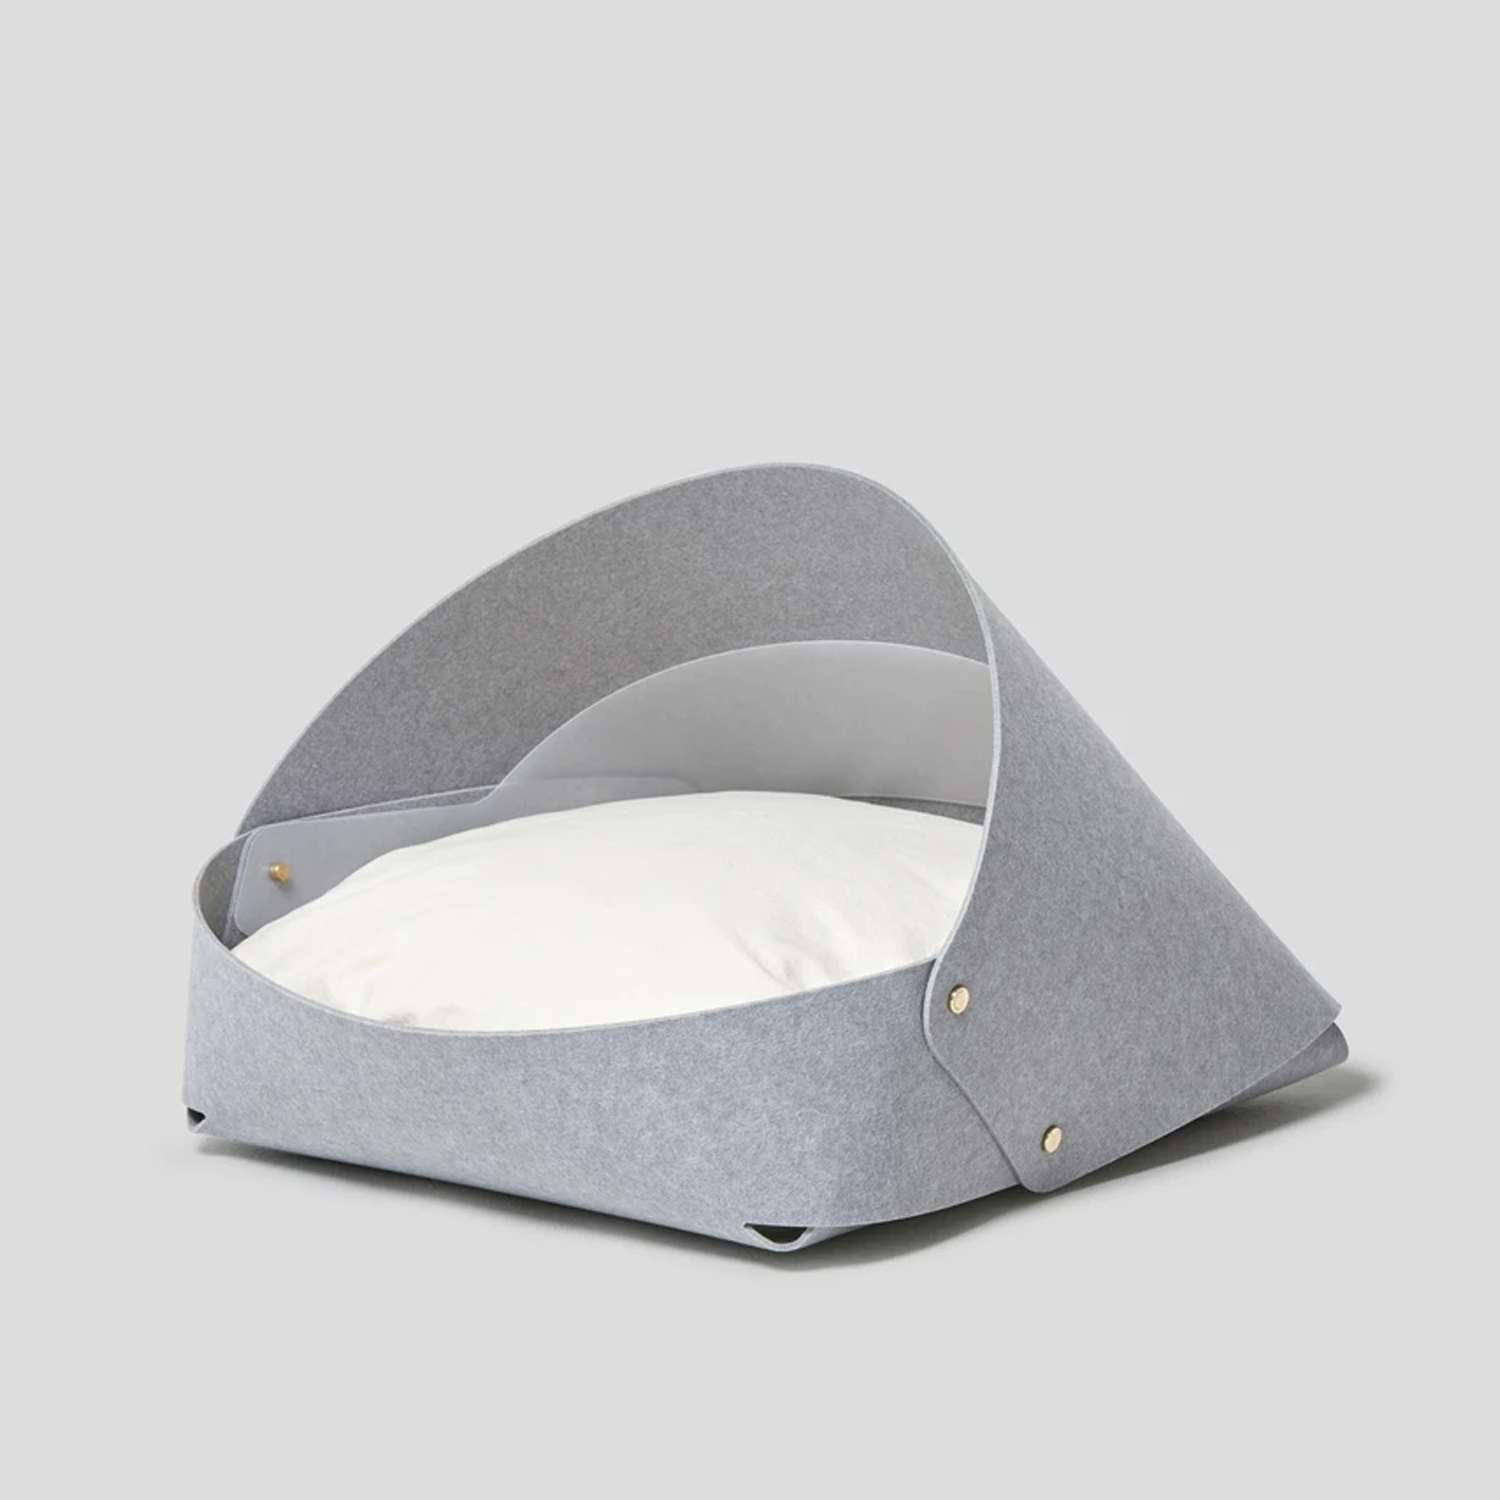 Pet Boutique - Dog Beds - Grey Marron Dog Bed by Pets So Good